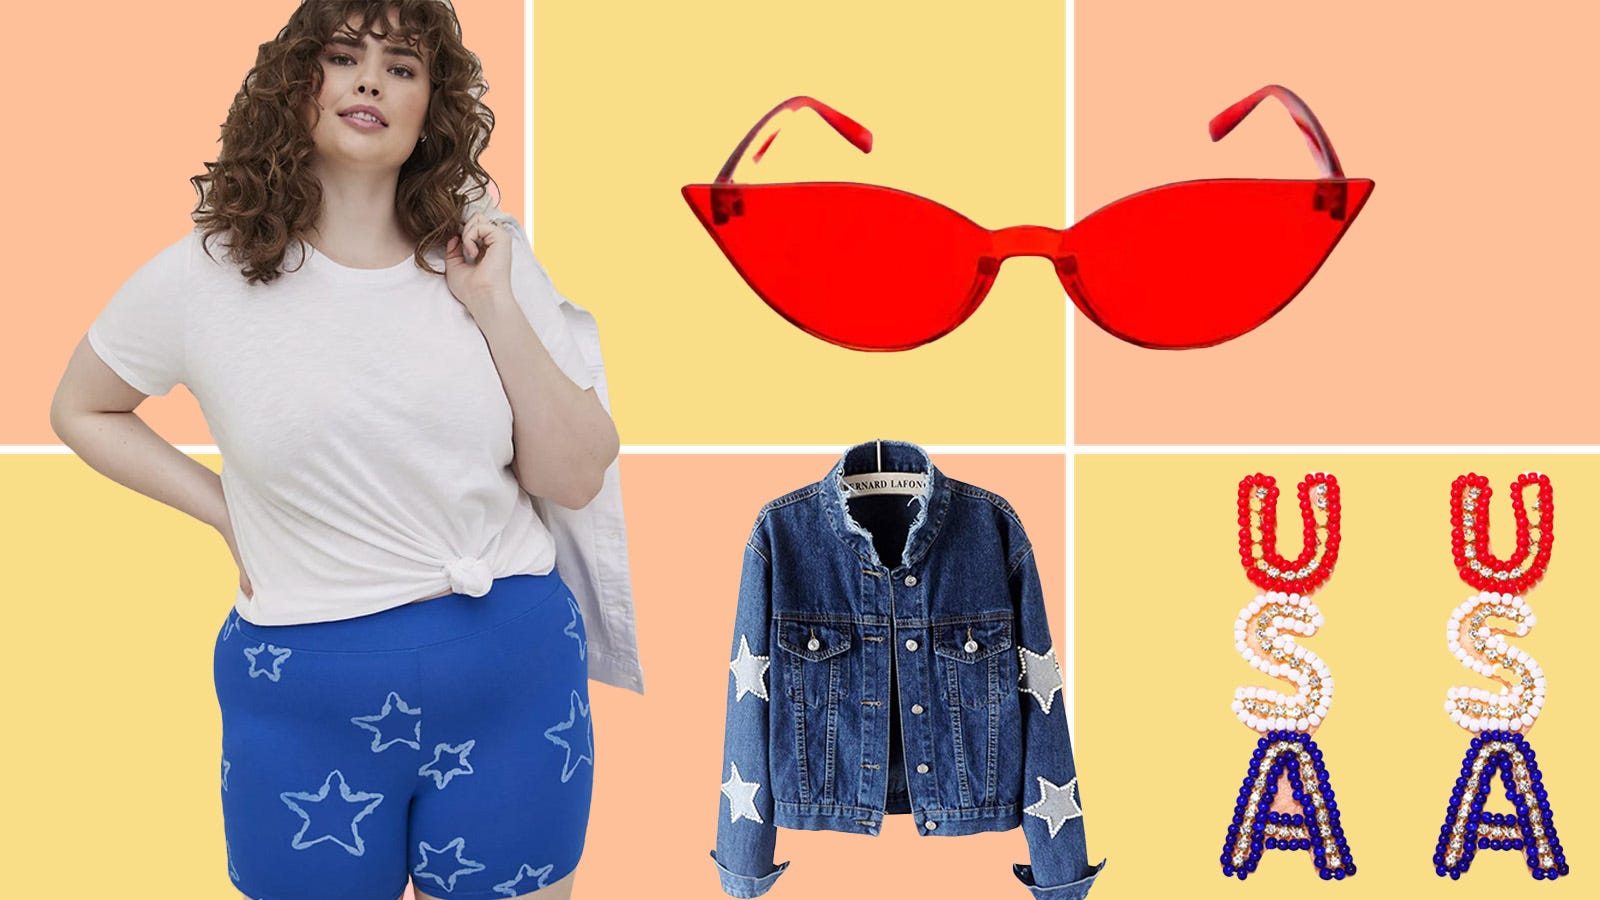 6 Fourth of July outfit ideas to kick up the heat this summer season thumbnail